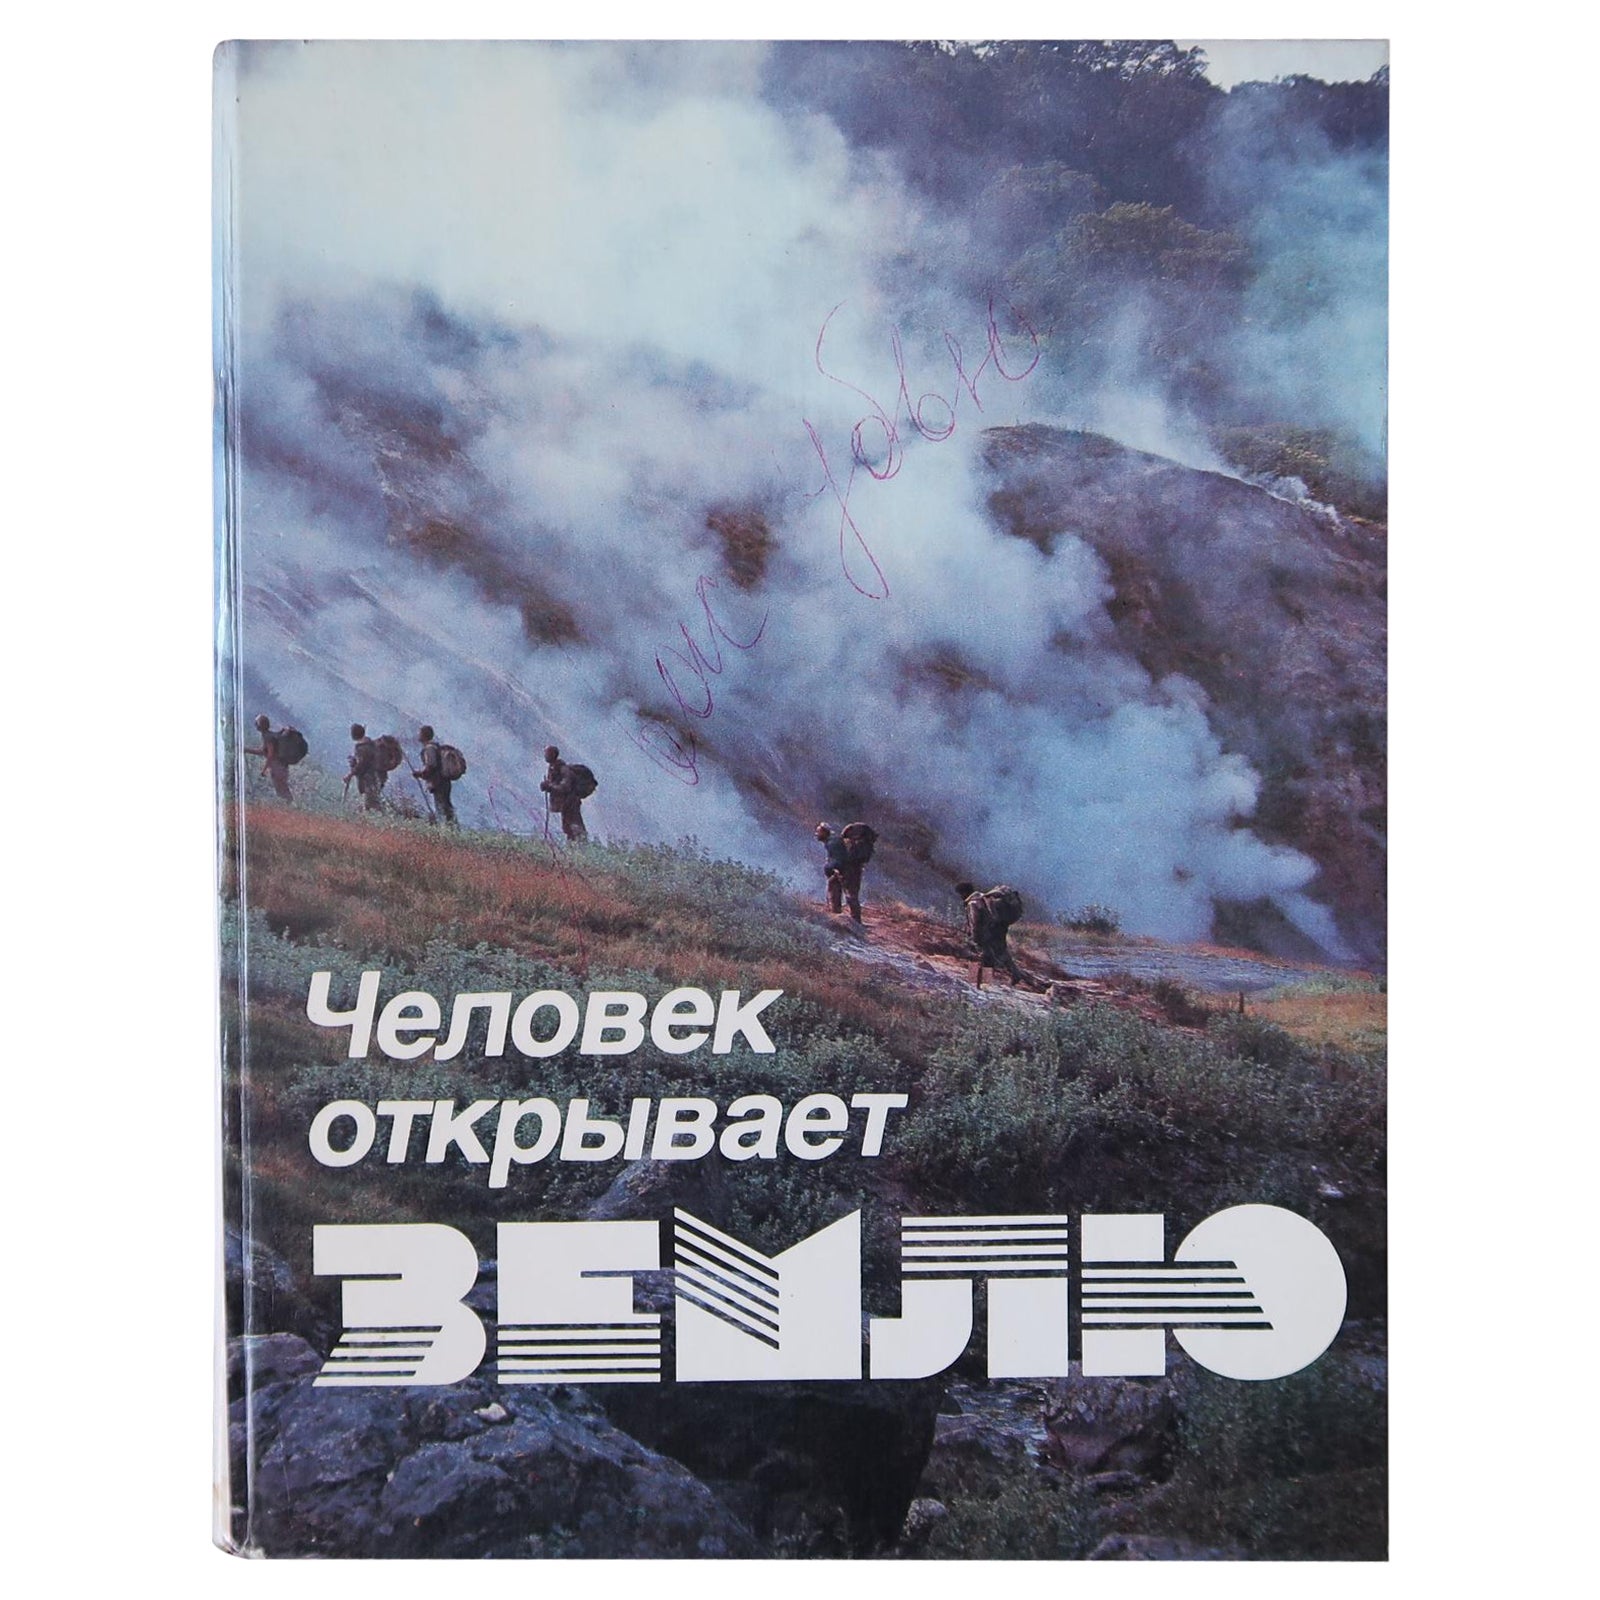 Vintage Book: Man Discovers the Earth (USSR, 1986), 1J198 For Sale